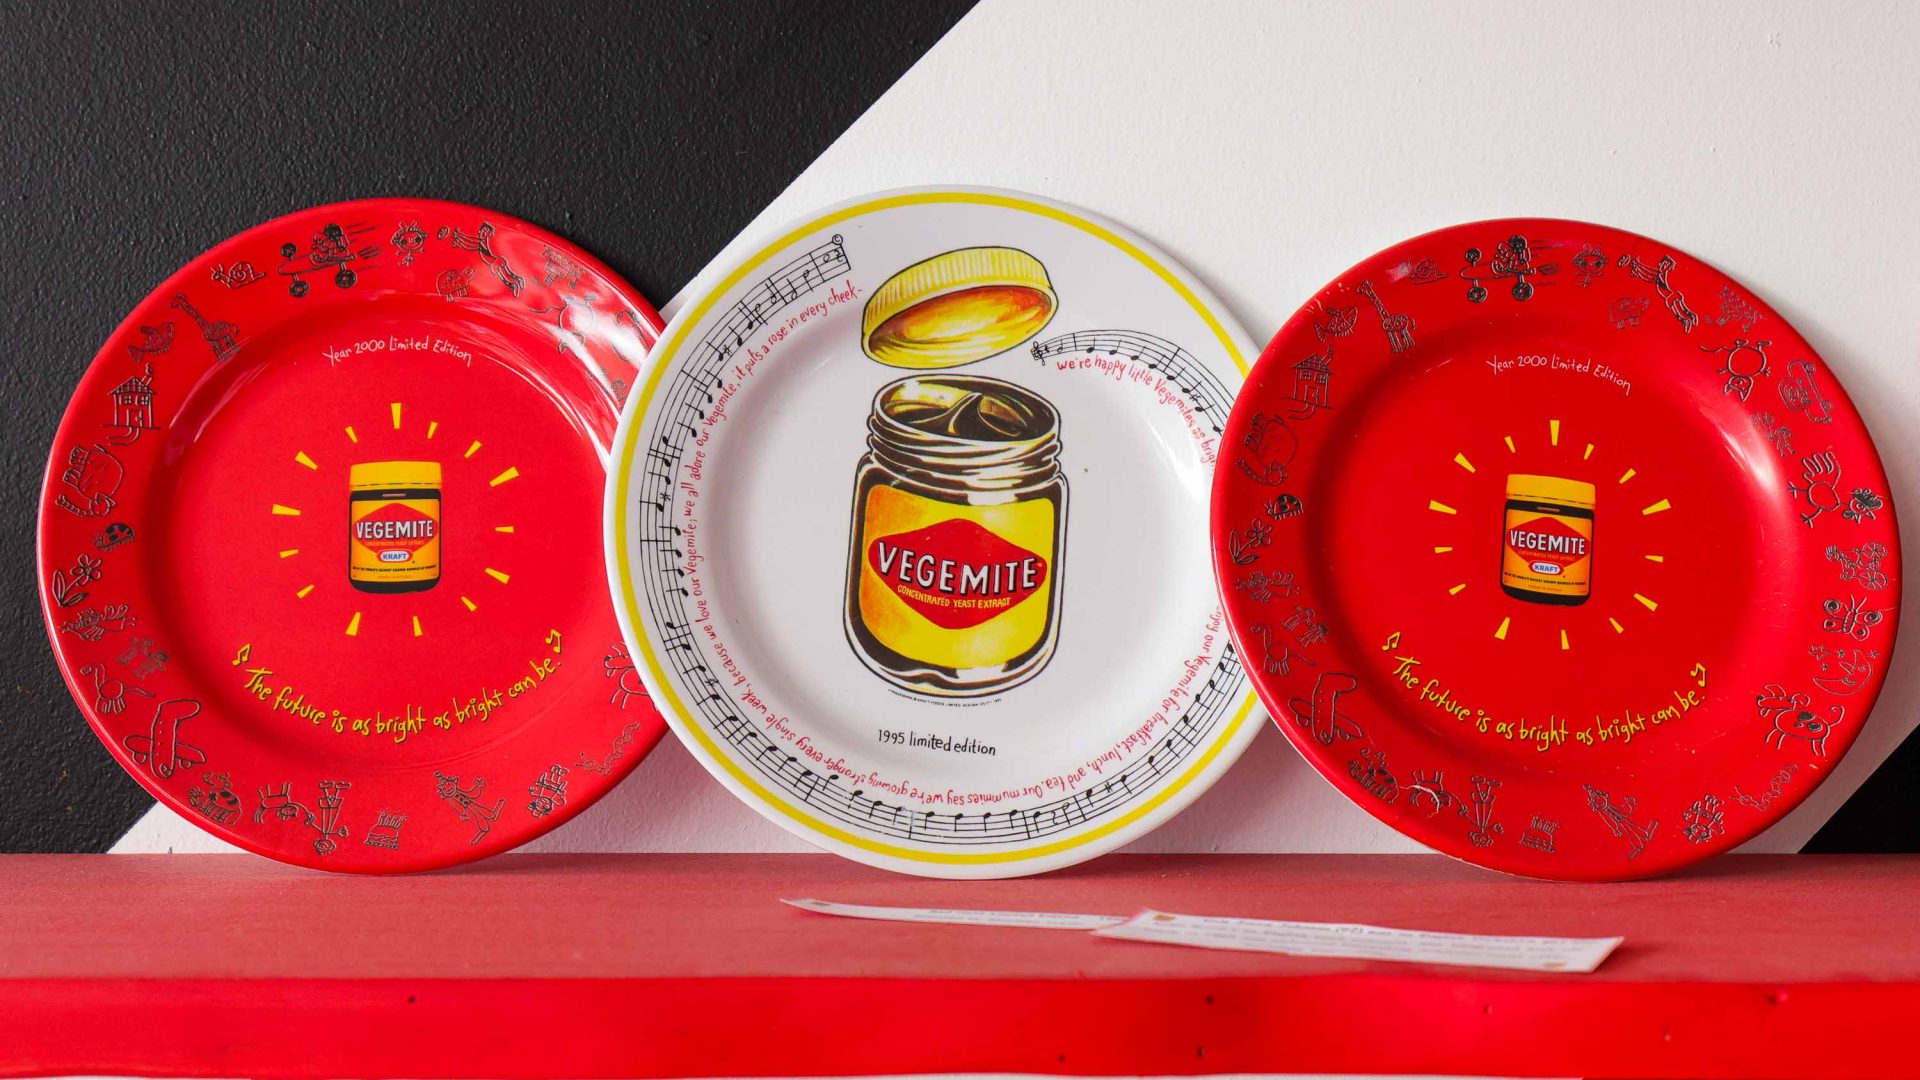 Decorative plates with Vegemite jars on them, on display at the museum.